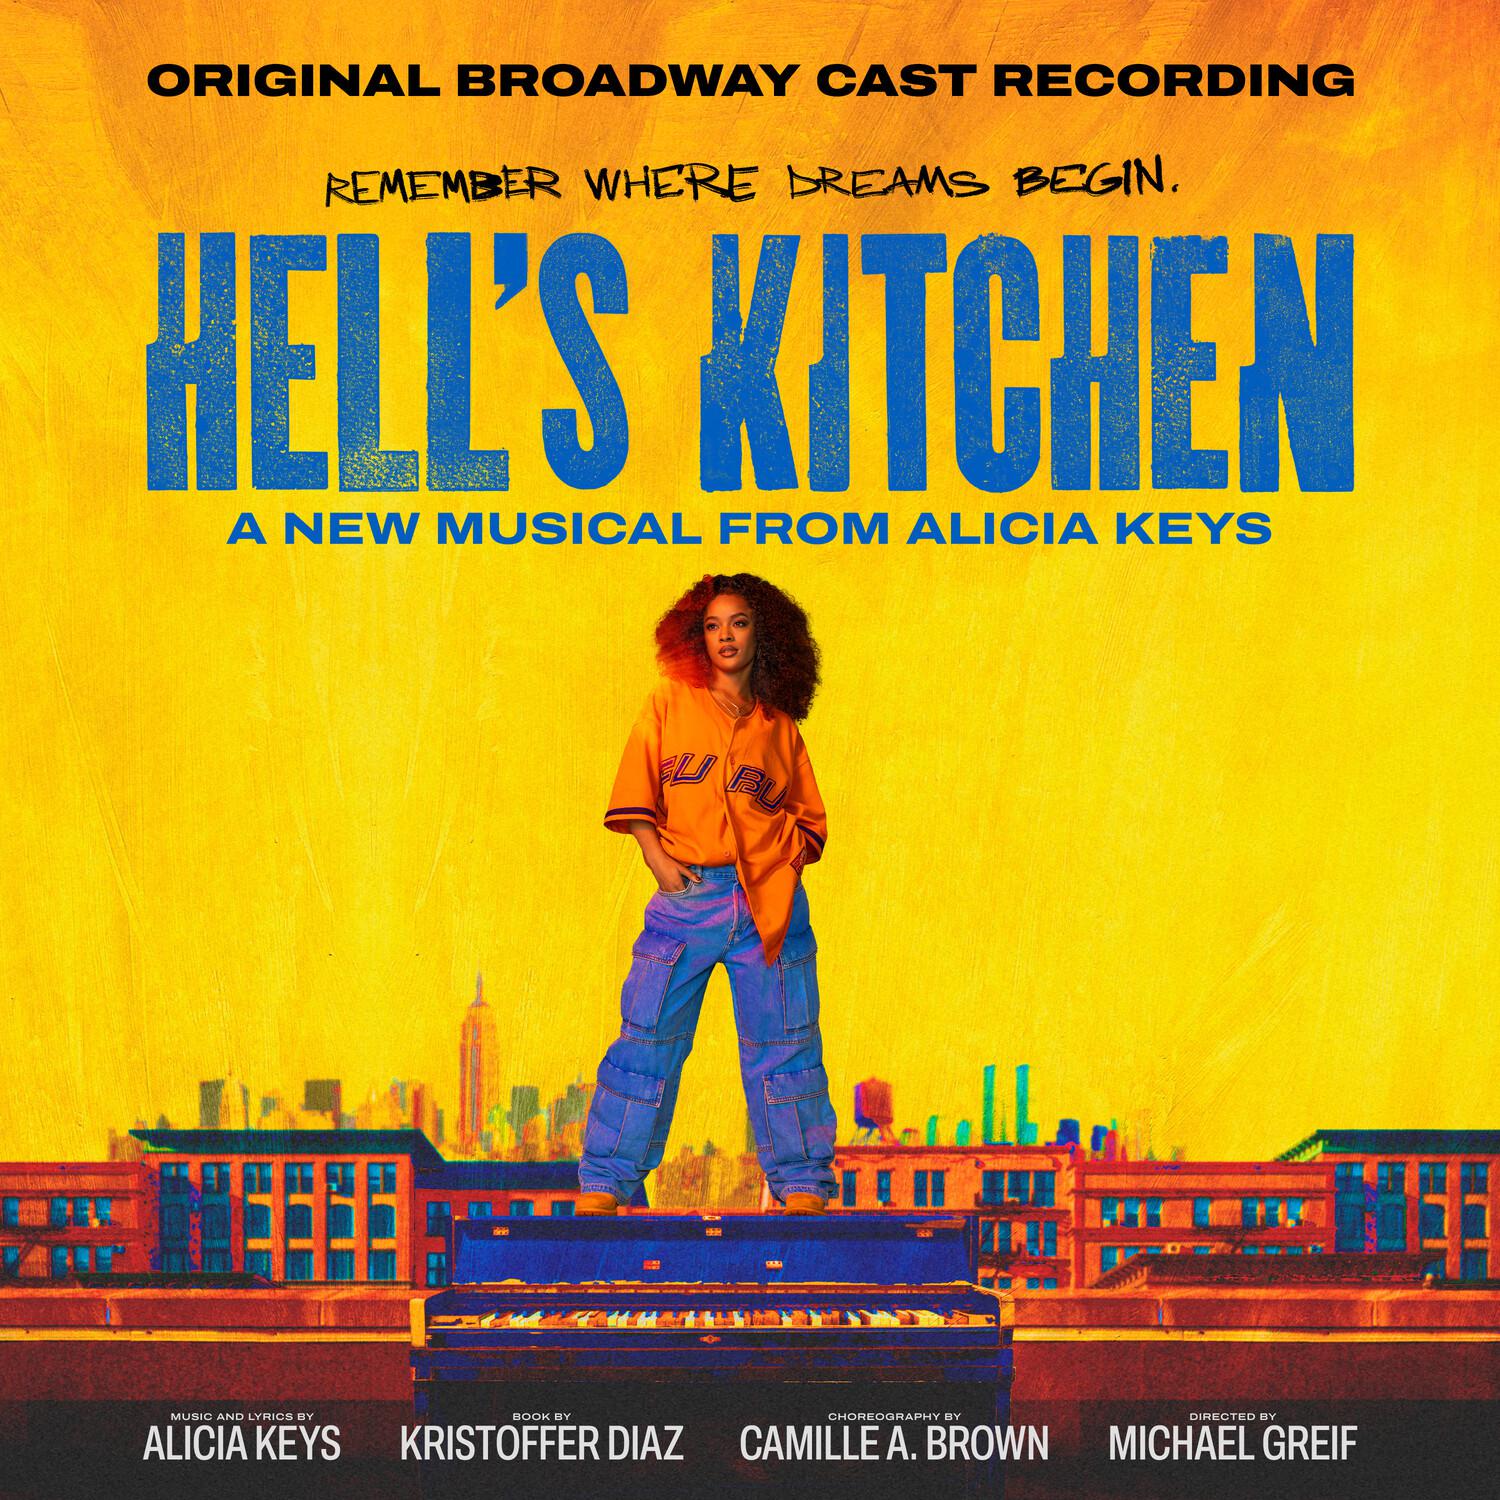 Alicia Keys - Kaleidoscope (From the New Broadway Musical “Hell’s Kitchen”)